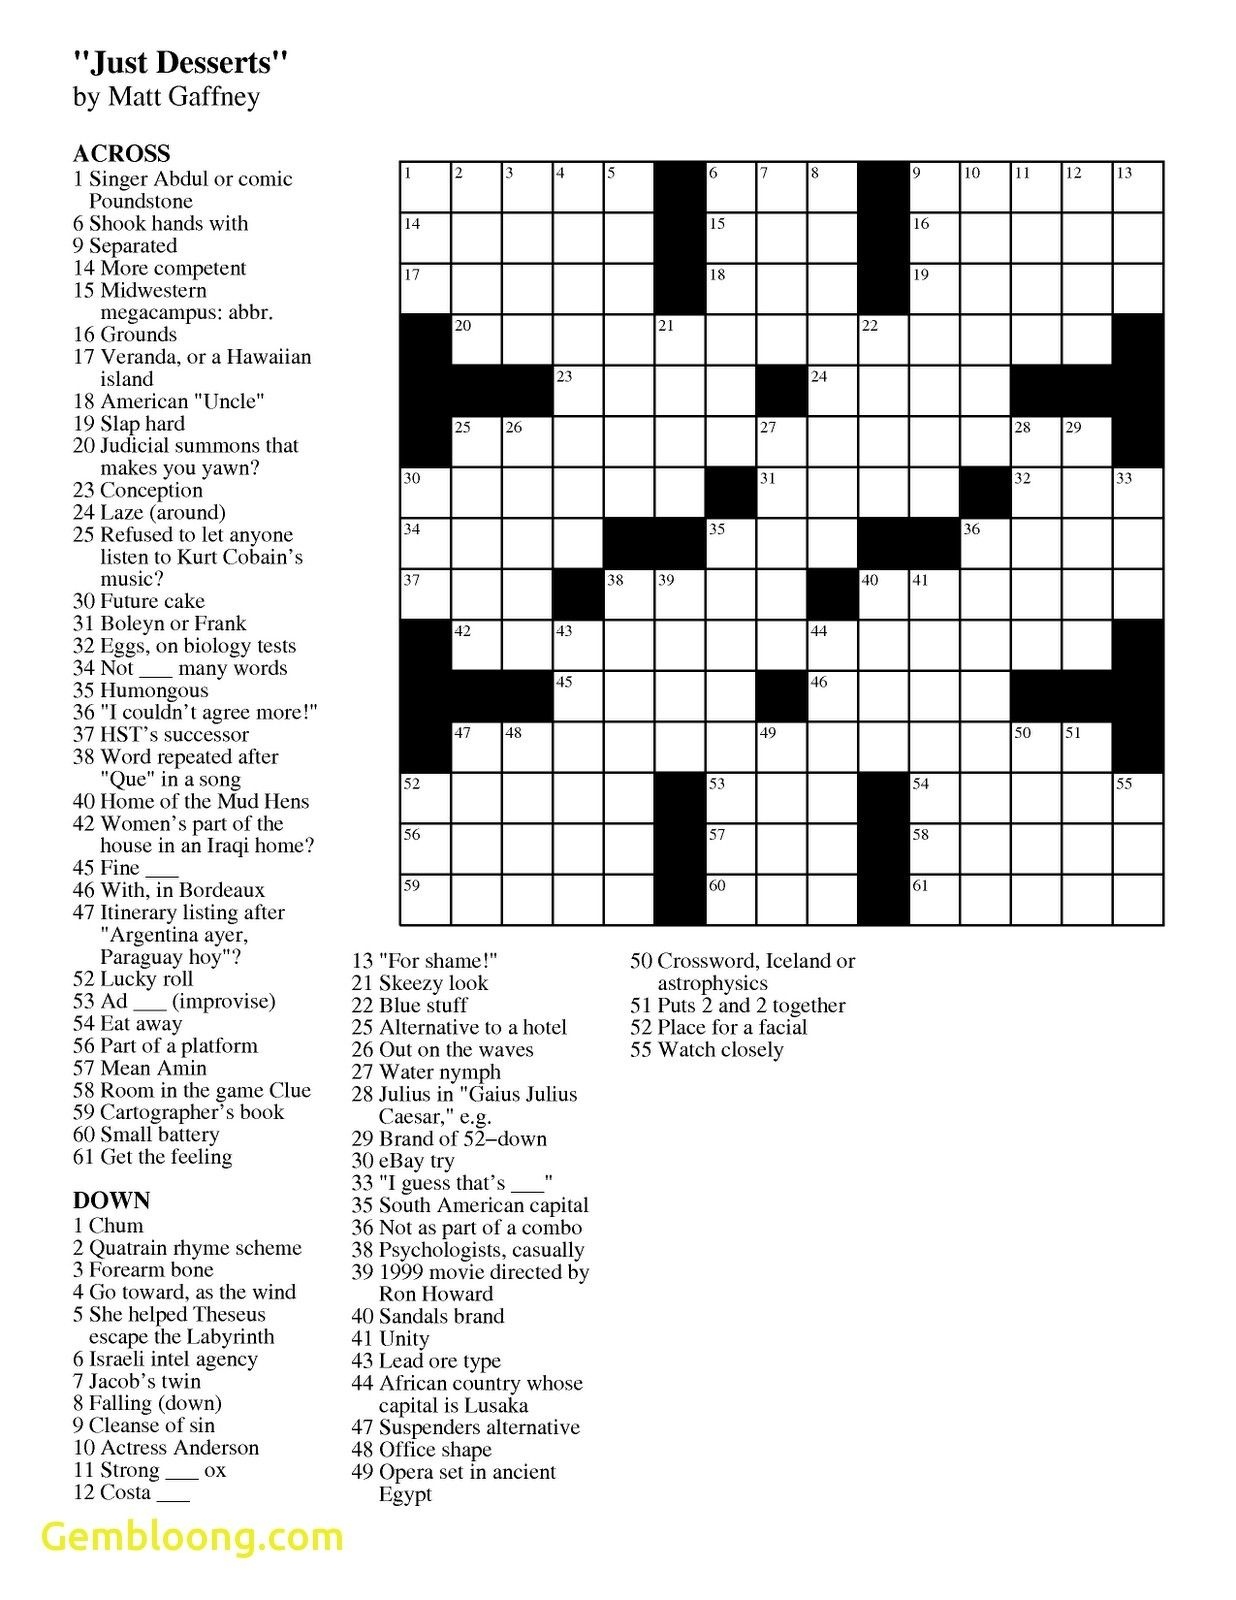 usa today free daily crosswords